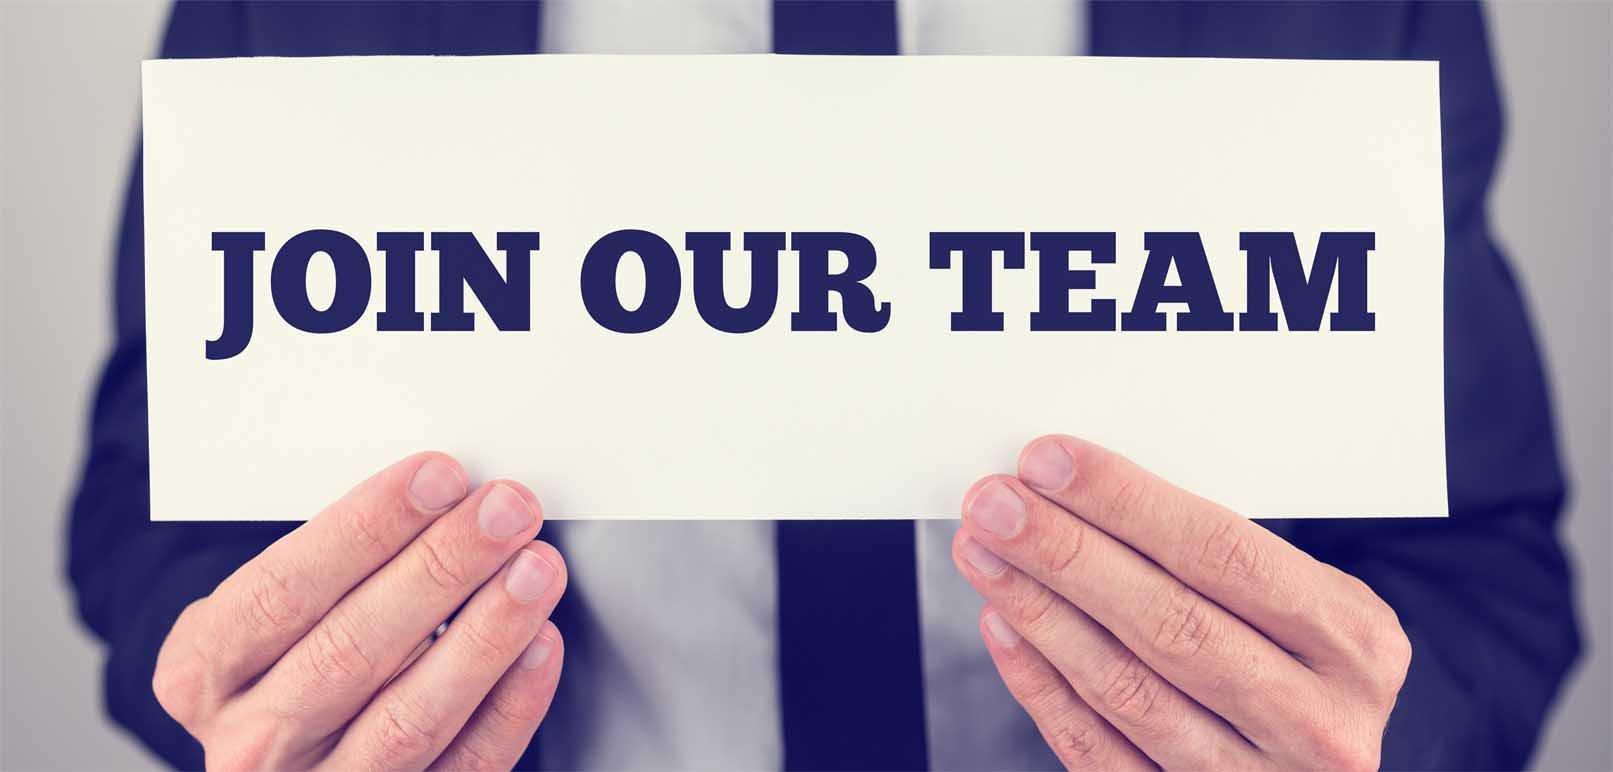 We're Hiring - Inward Investment Administration Assistant 